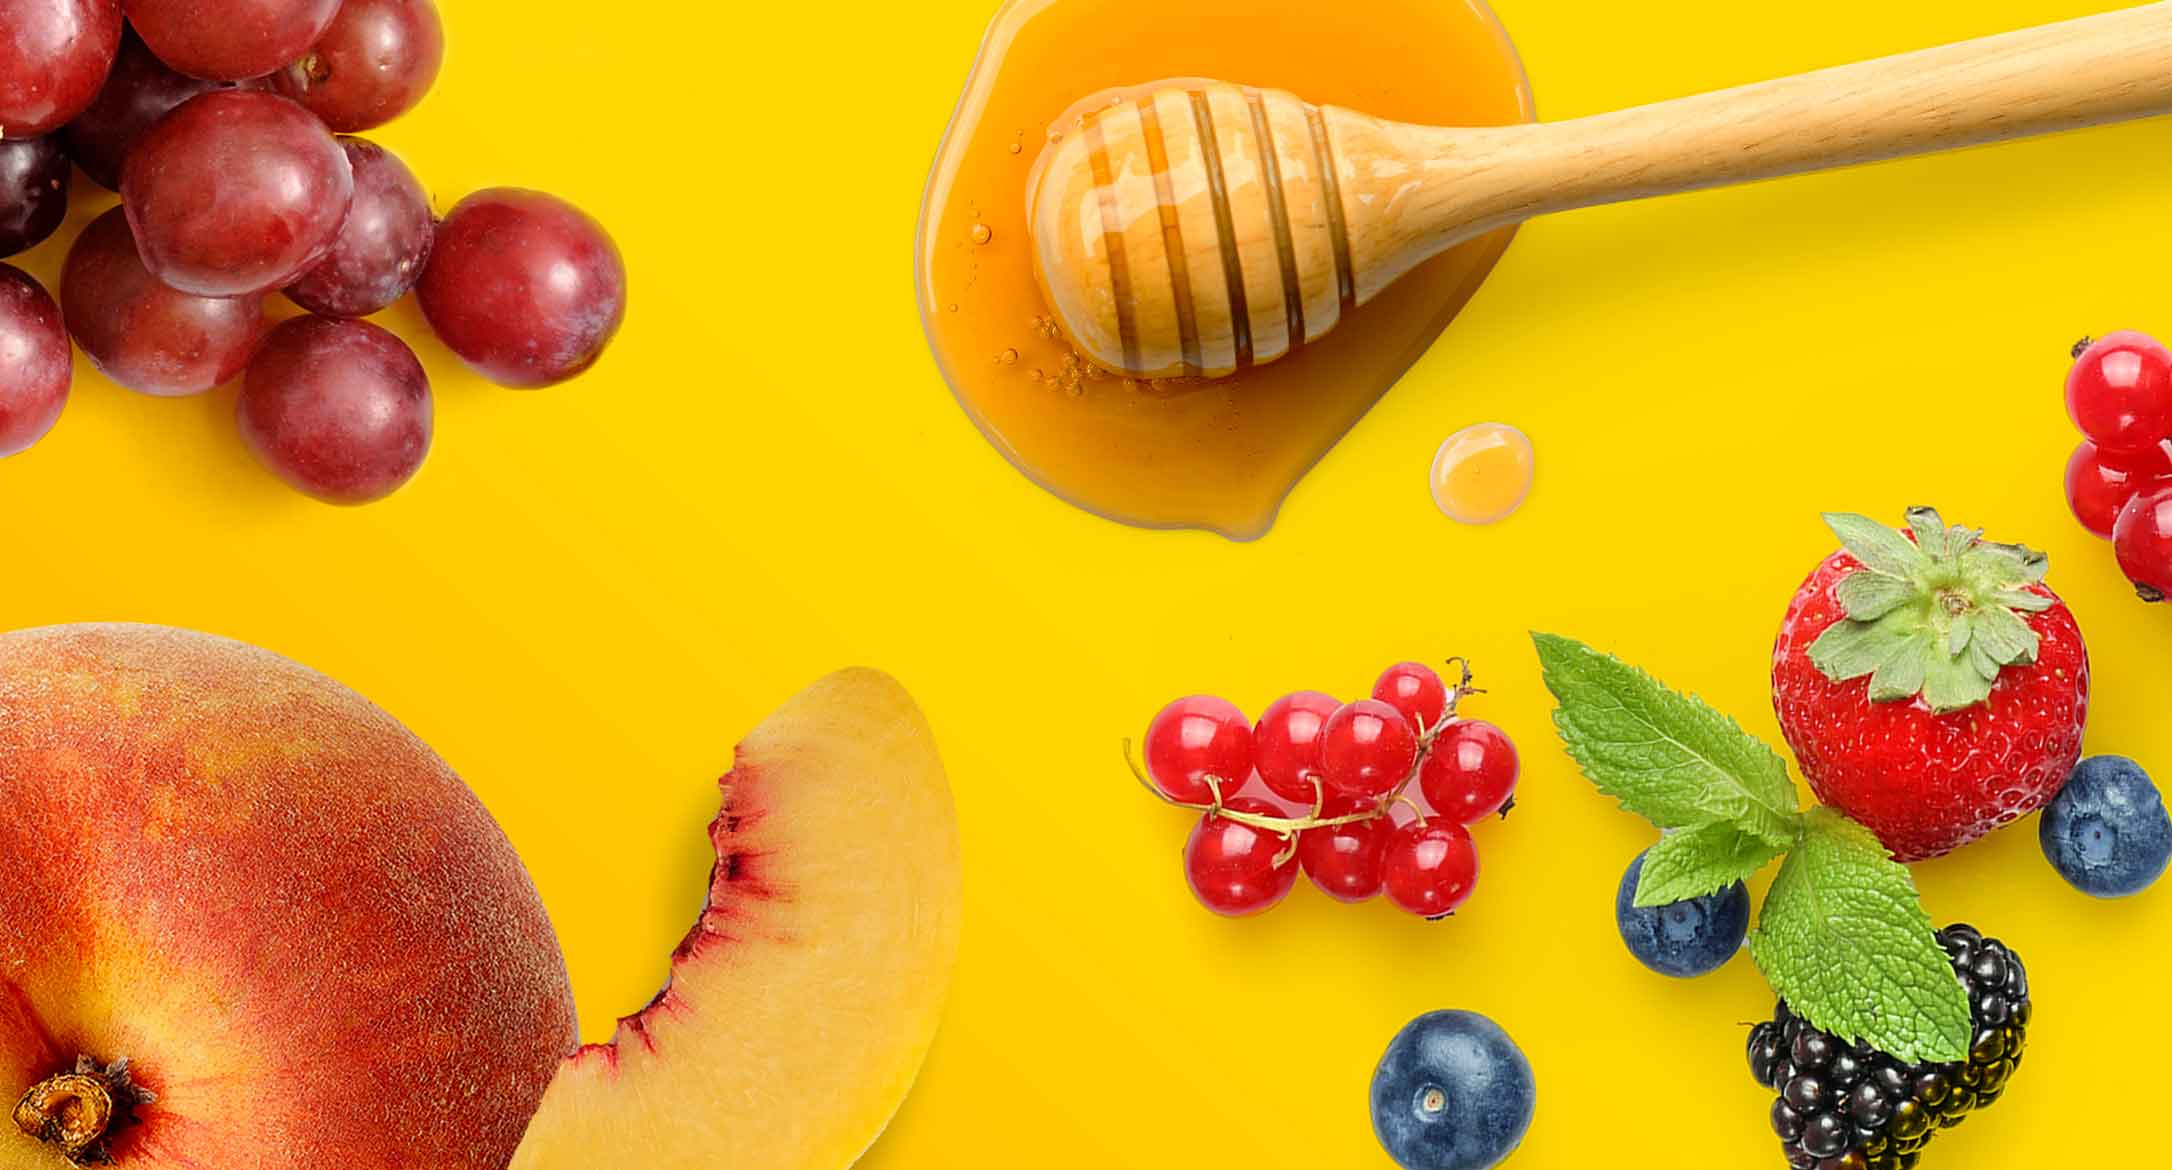 Honey, peach, grapes and mixed berries strewn across a yellow background